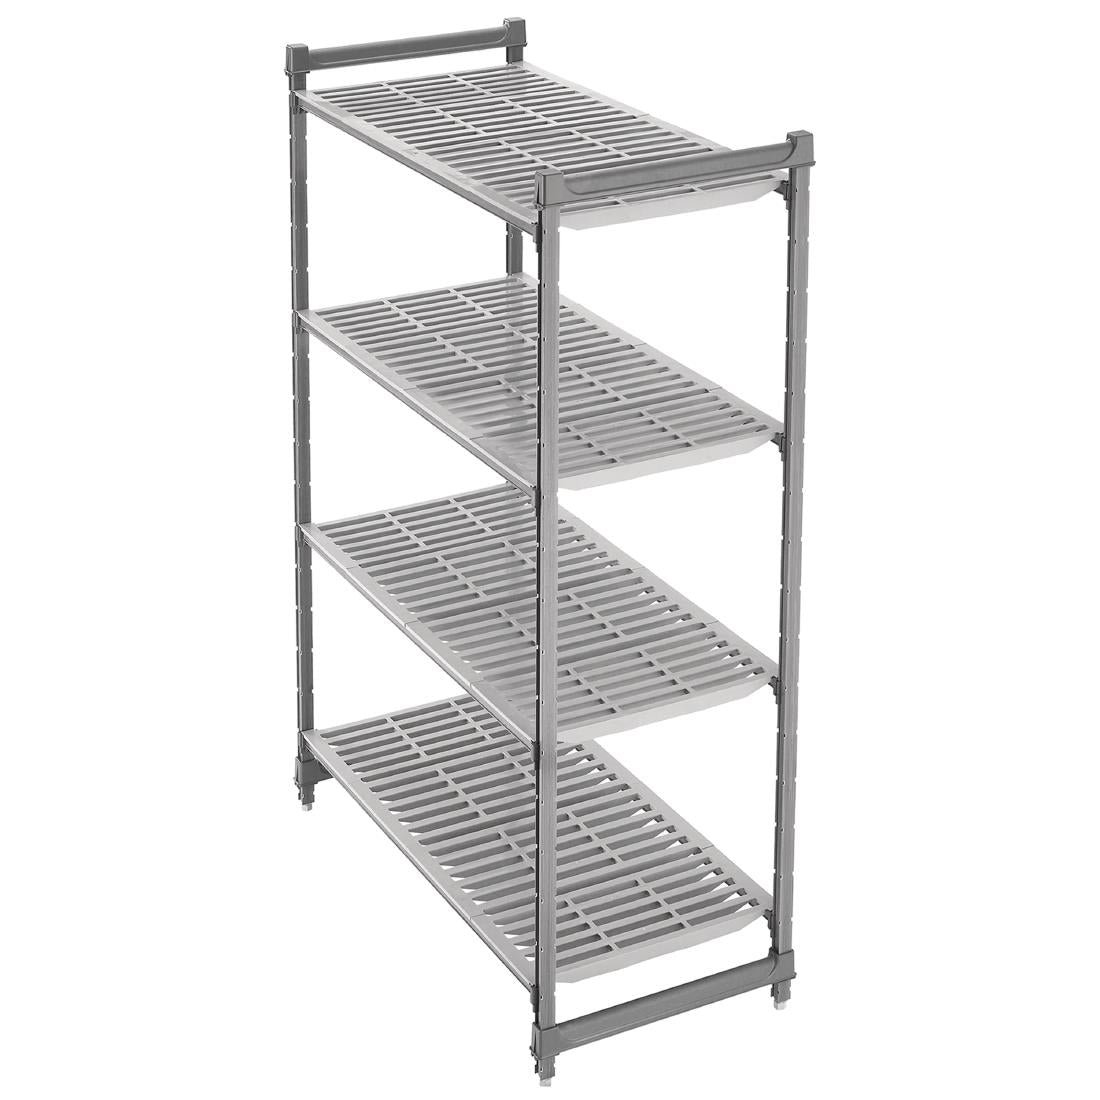 GH617 Cambro Stationary Vented 4 Shelving Units 1830 x 910 x 460mm JD Catering Equipment Solutions Ltd